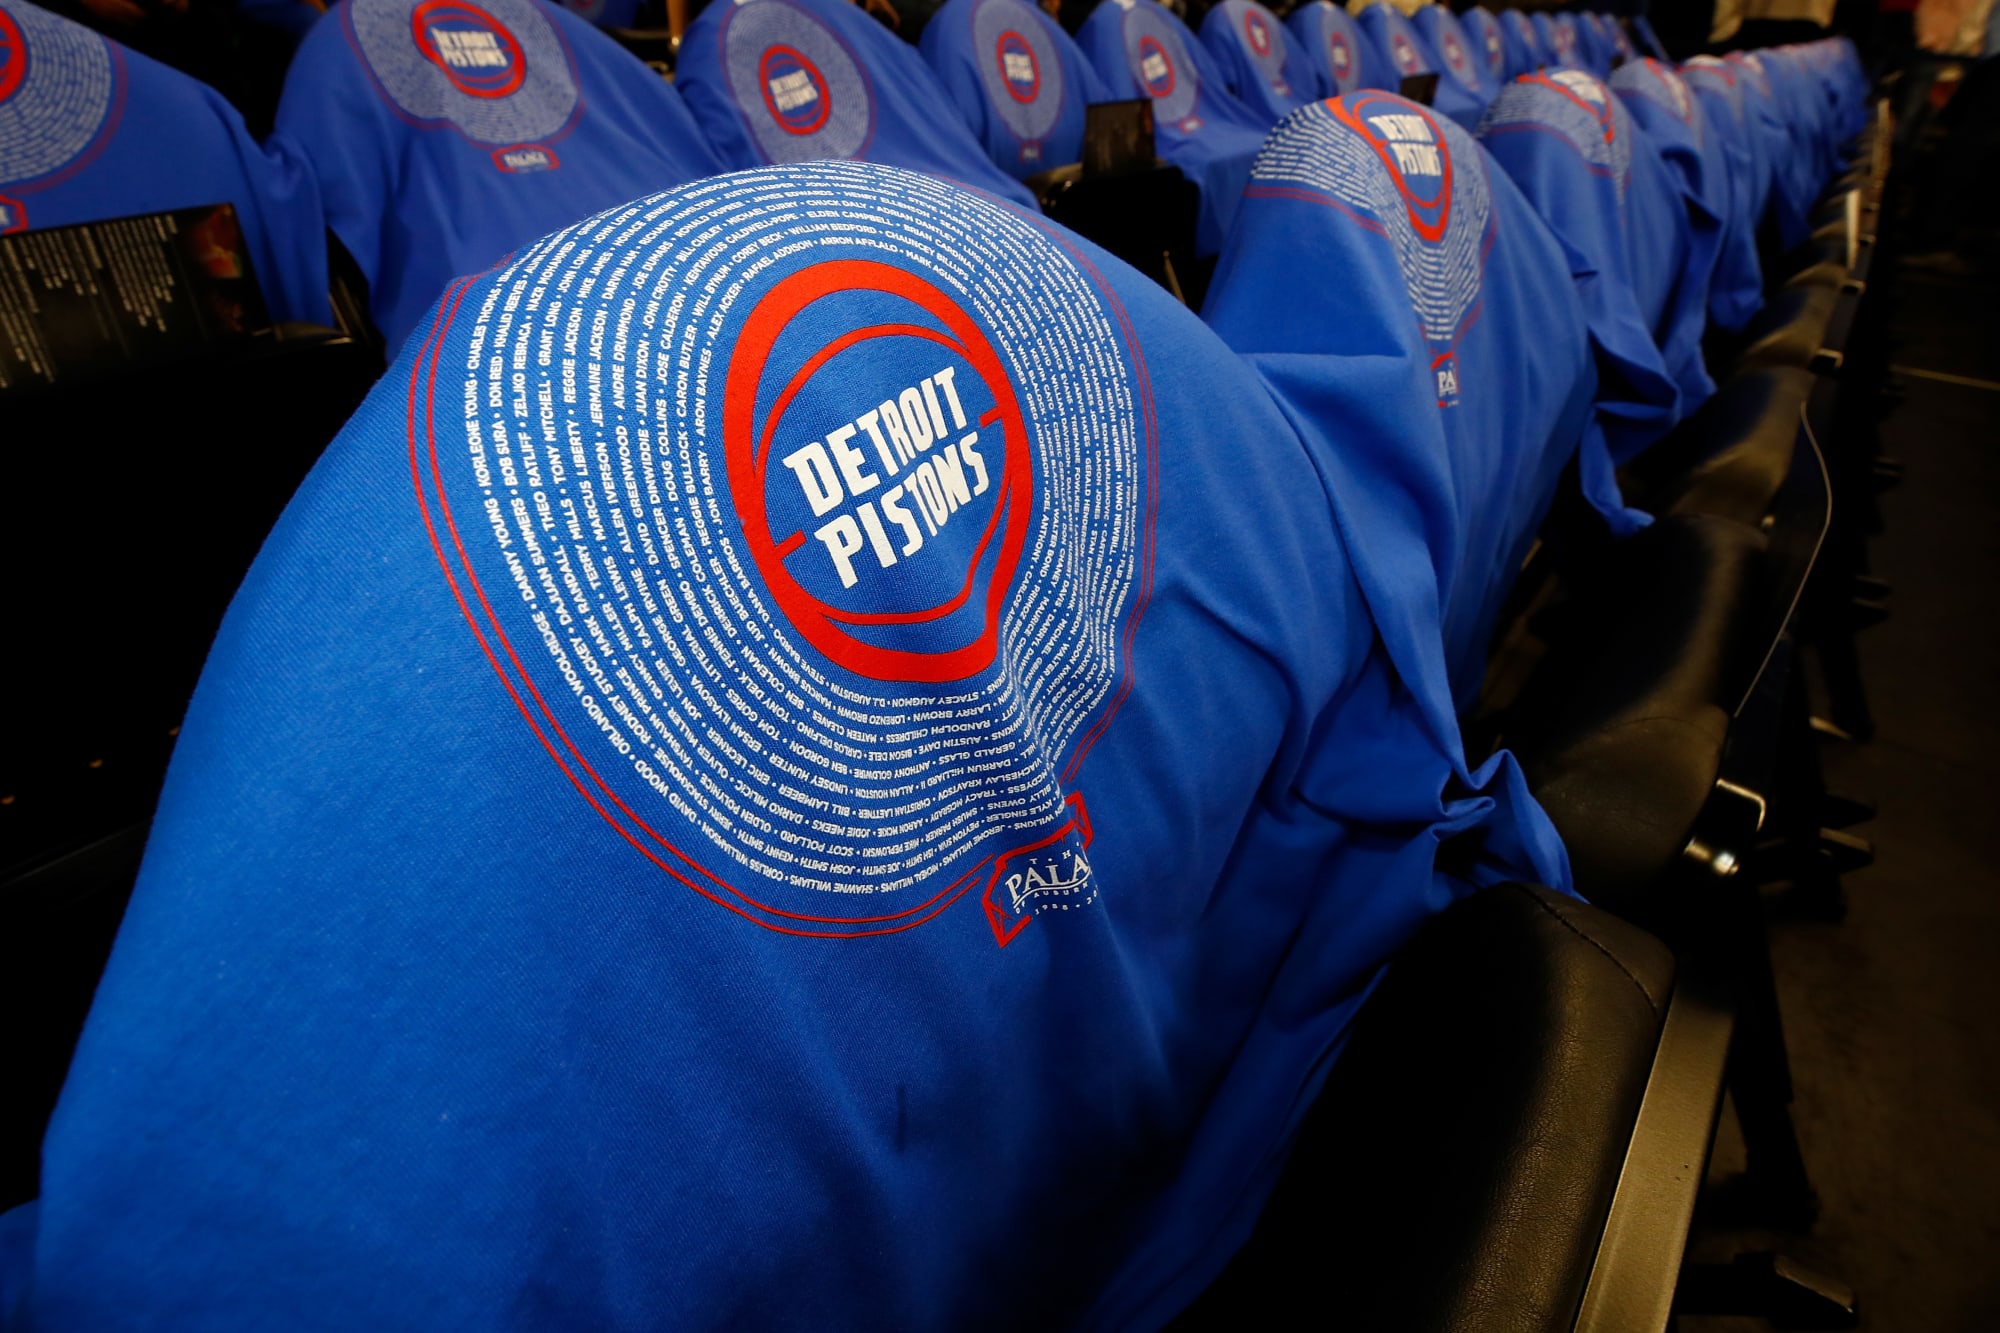 Detroit Pistons: First reaction to the 'Statement' uniform